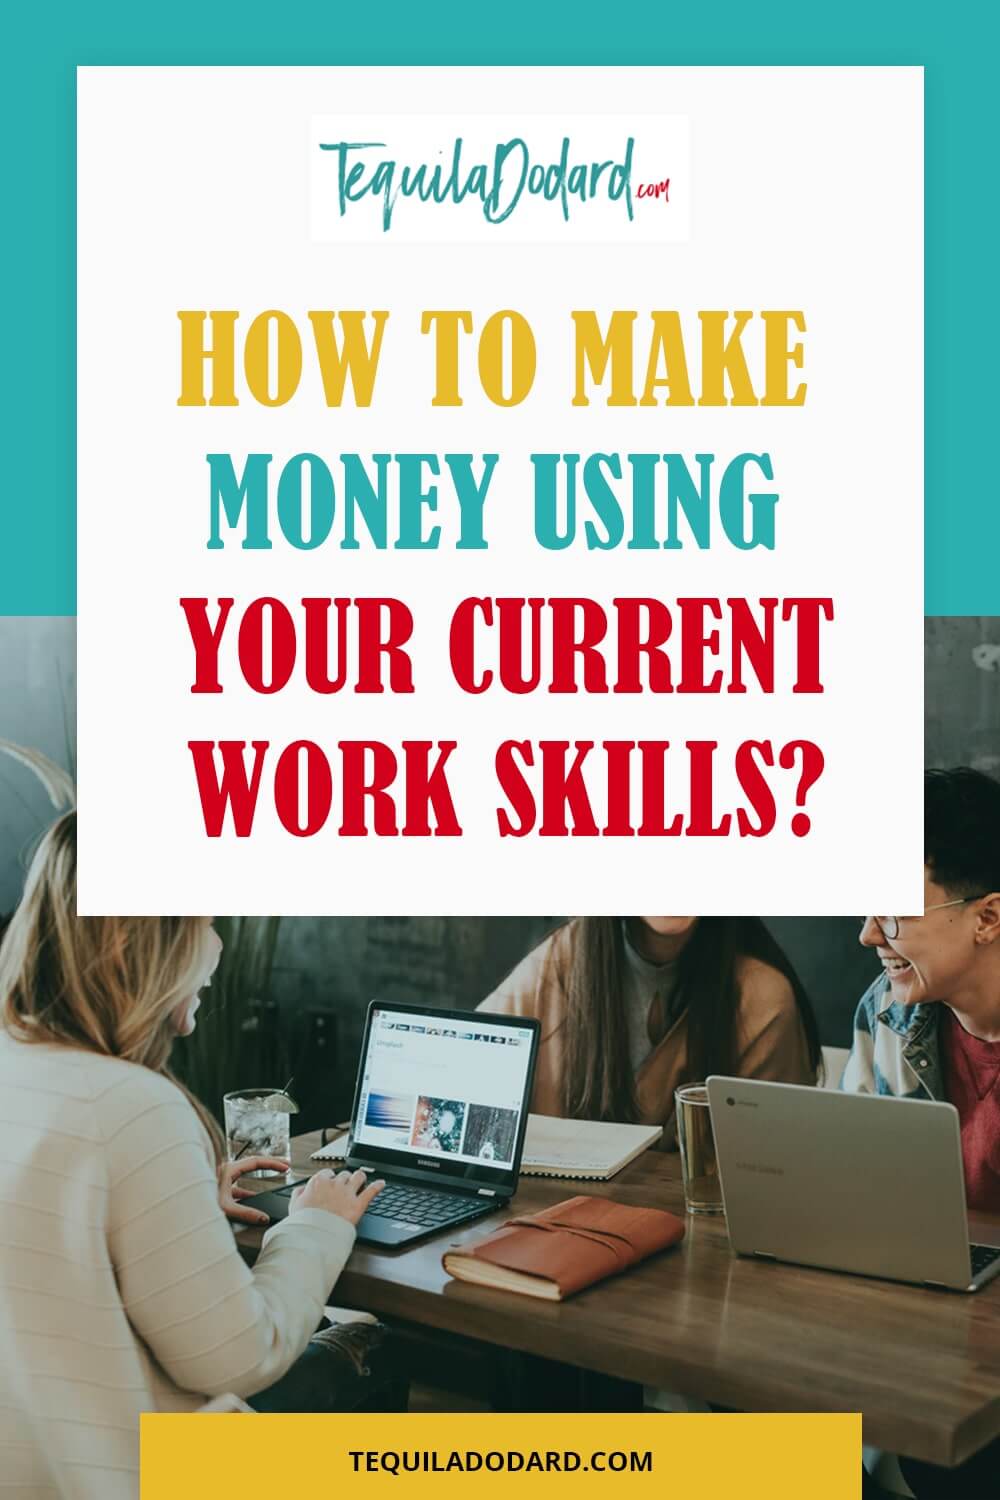 How-to-make-money-using-your-current-workskills